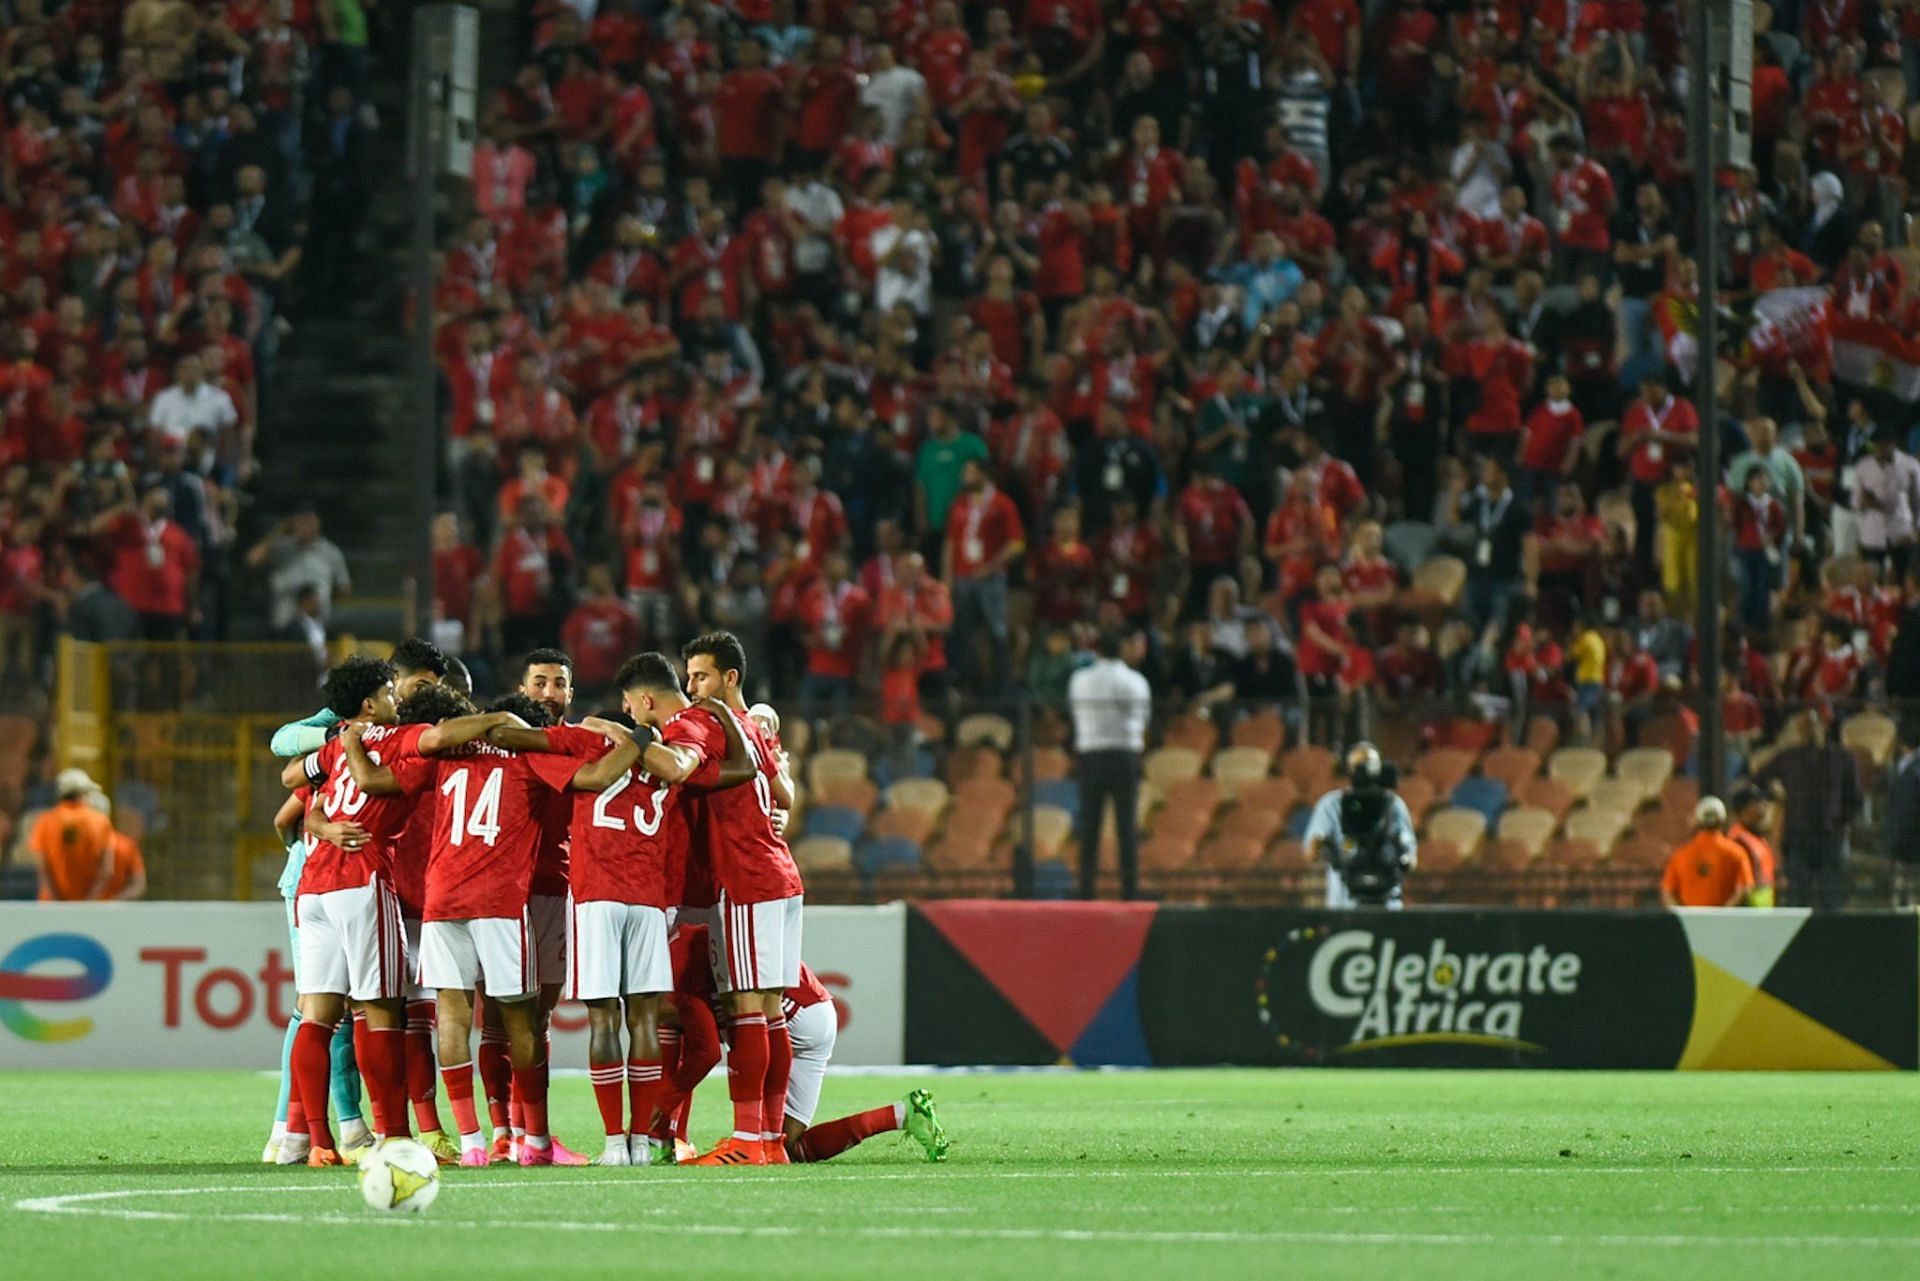 Al Ahly and Wydad Casablanca will meet in the CAF Champions League final on Sunday